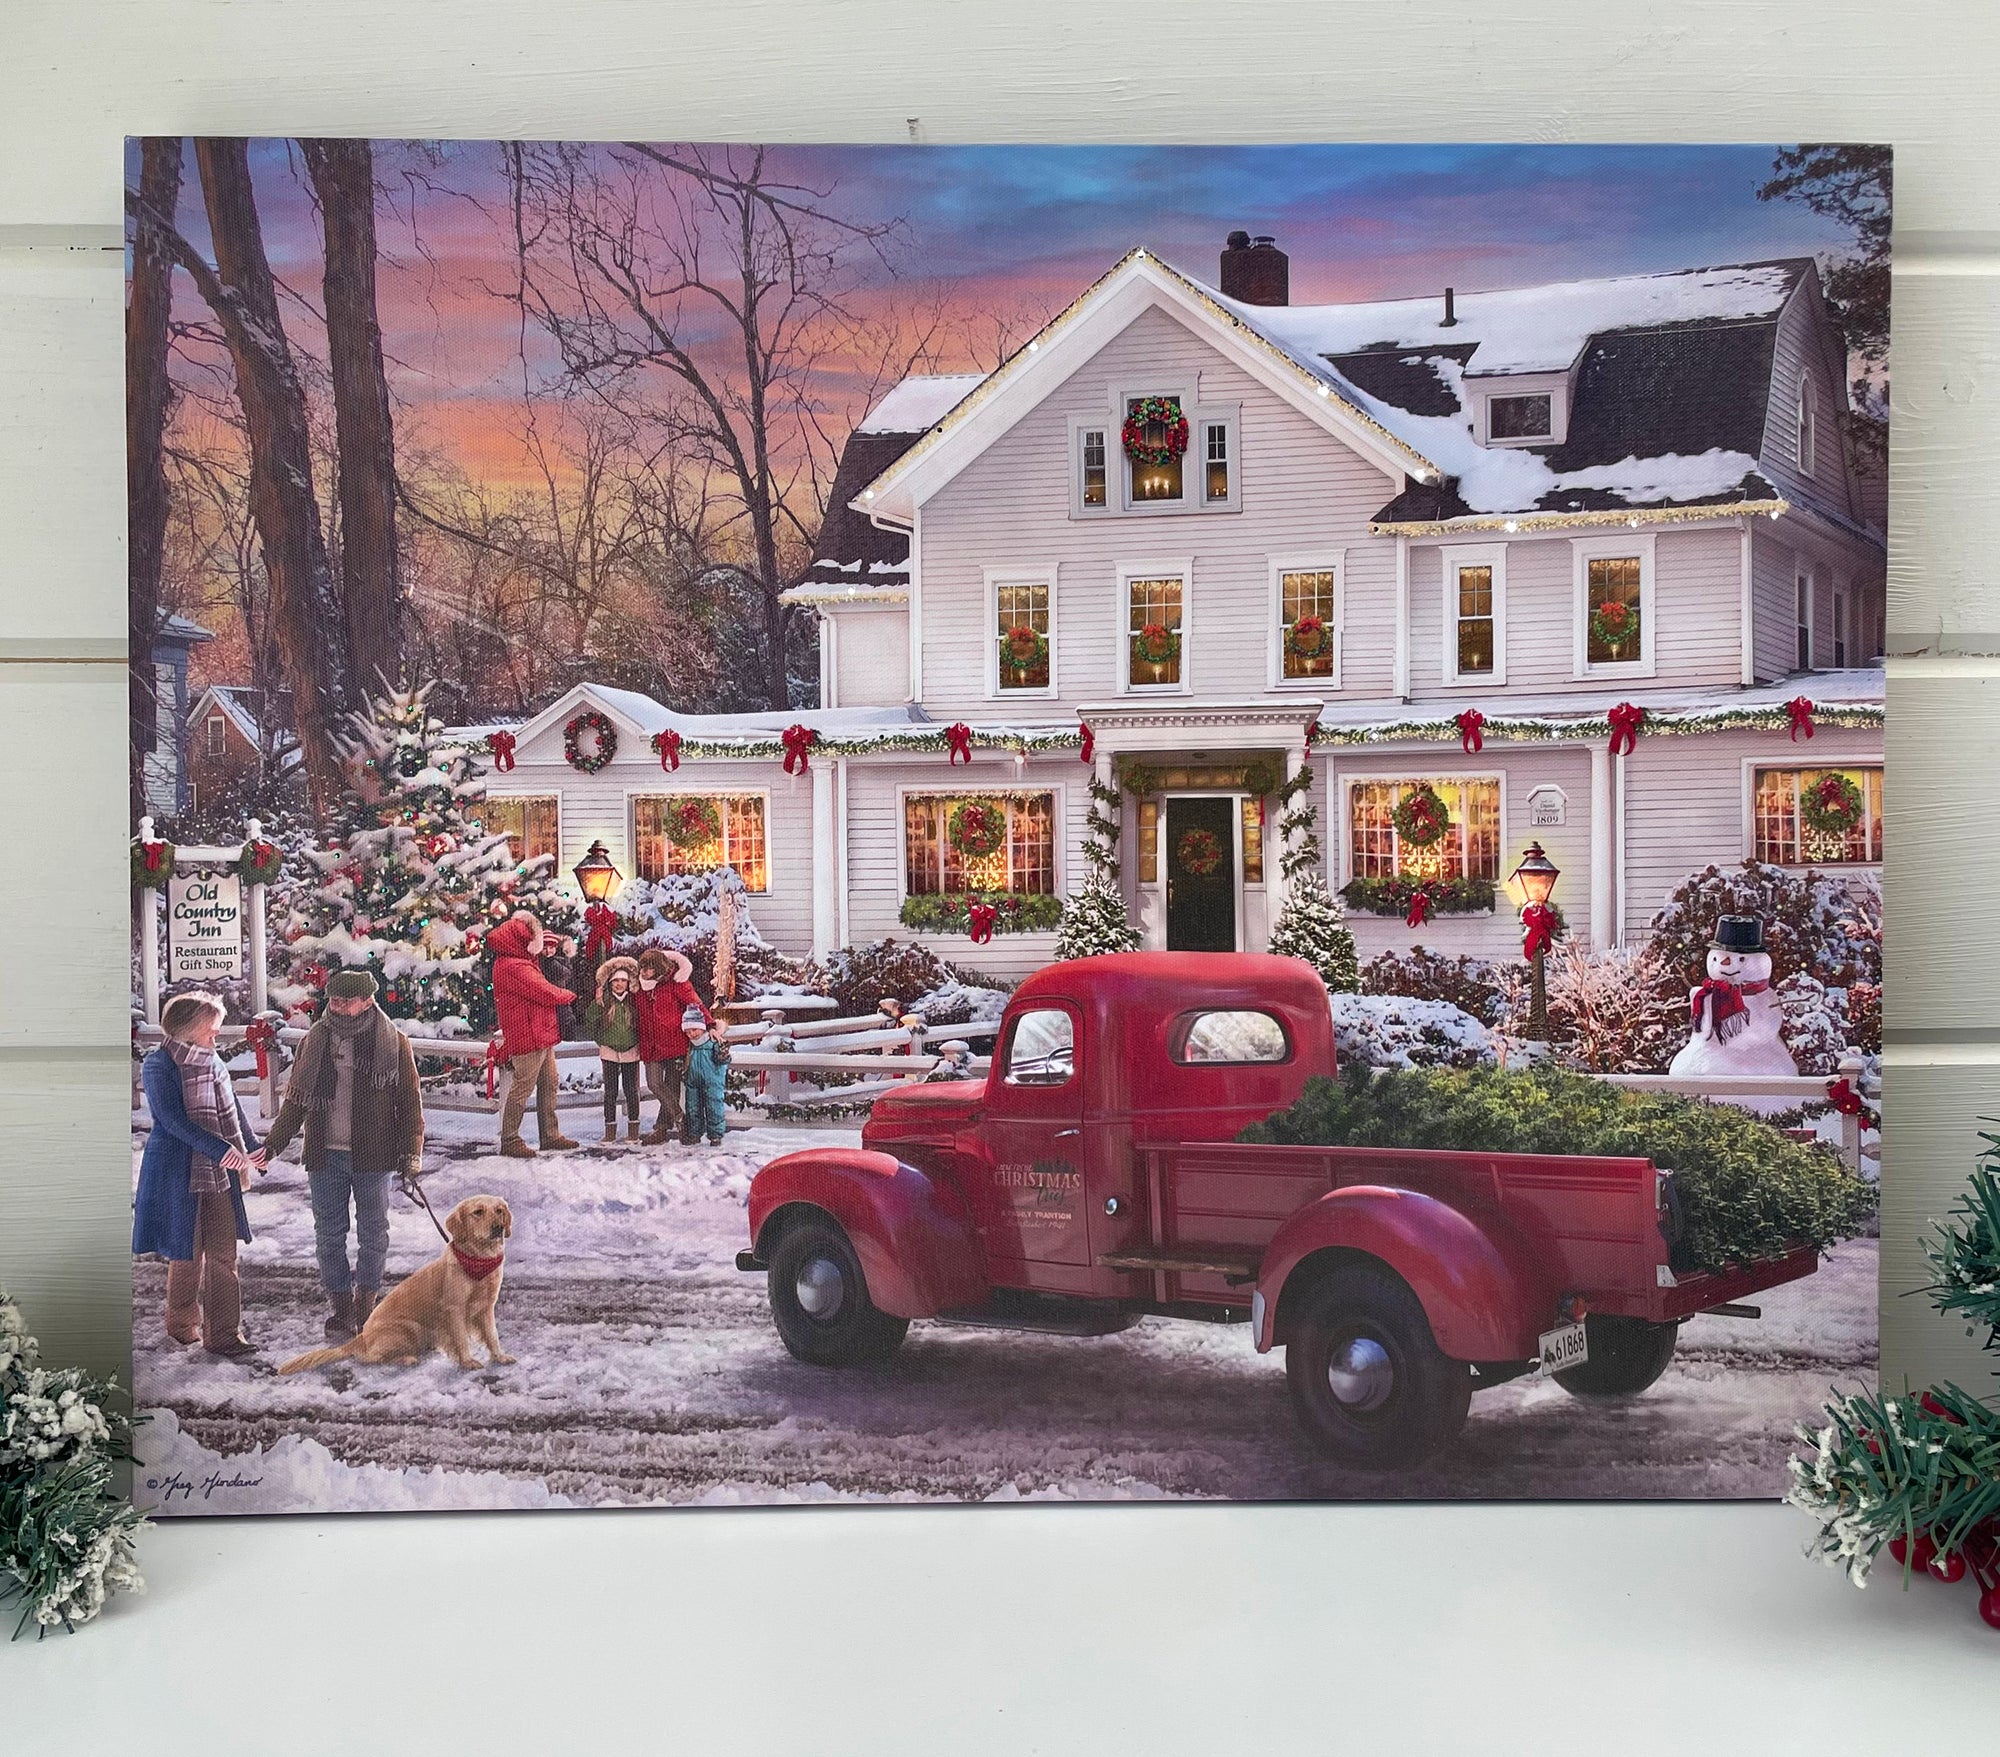 an old red truck sits parked in front of a picturesque white country inn. The truck bed holds a fresh cut tree, ready to be decorated and enjoyed by the fireplace inside.  The inn is adorned with wreaths and lights, setting the scene for a magical holiday season. A snowman stands tall in the front yard.